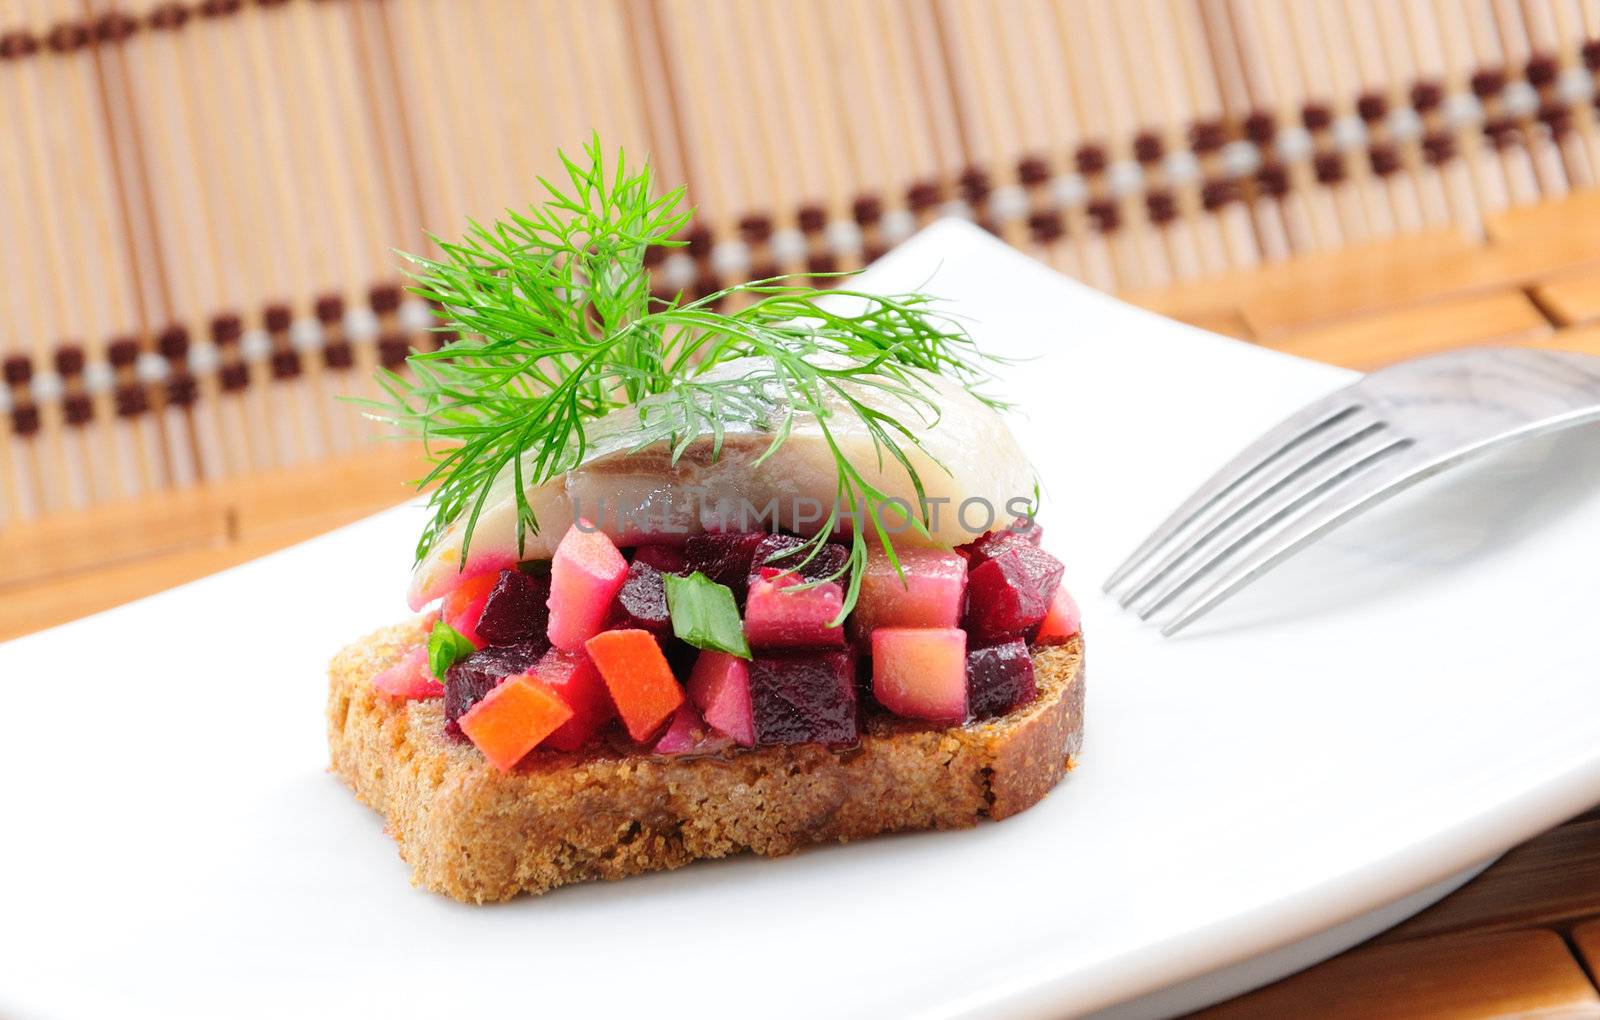 Sandwiches with rye bread, herring and vegetables by Apolonia